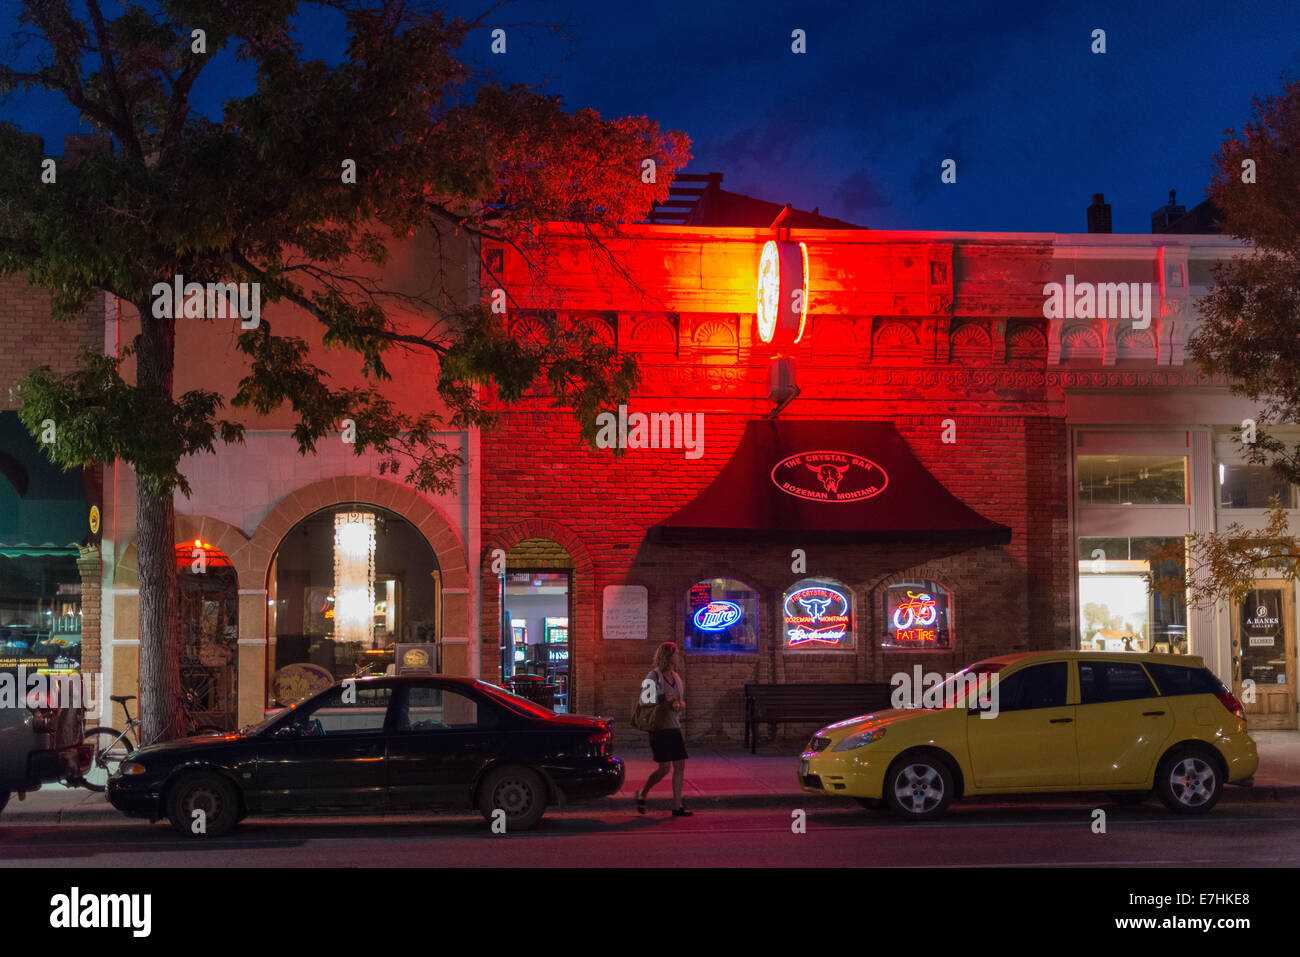 A woman walks toward her car as darkness descends Wednesday evening, 17th Sept., 2014, in downtown Bozeman, Mont., USA. As the autumnal equinox approaches, days in the northern latitudes are getting remarkably shorter. Stock Photo